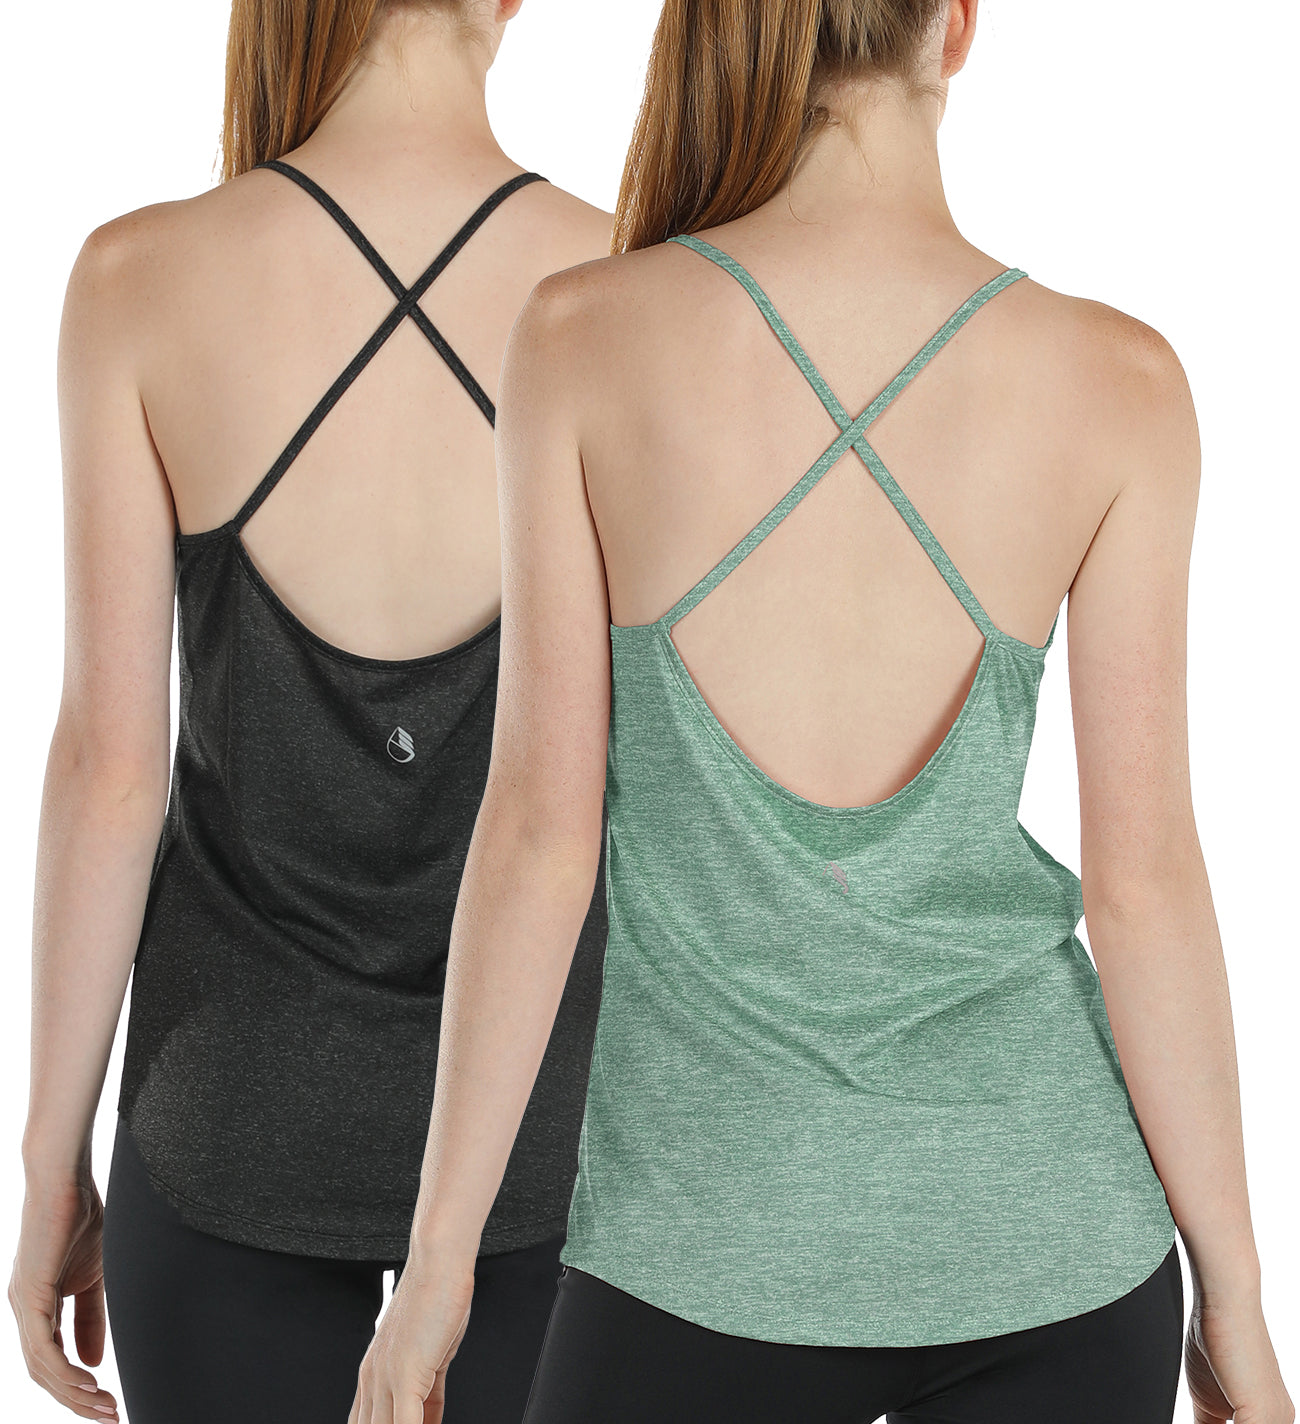 icyzone Workout Tank Tops for Women - Athletic Yoga Tops Open Back